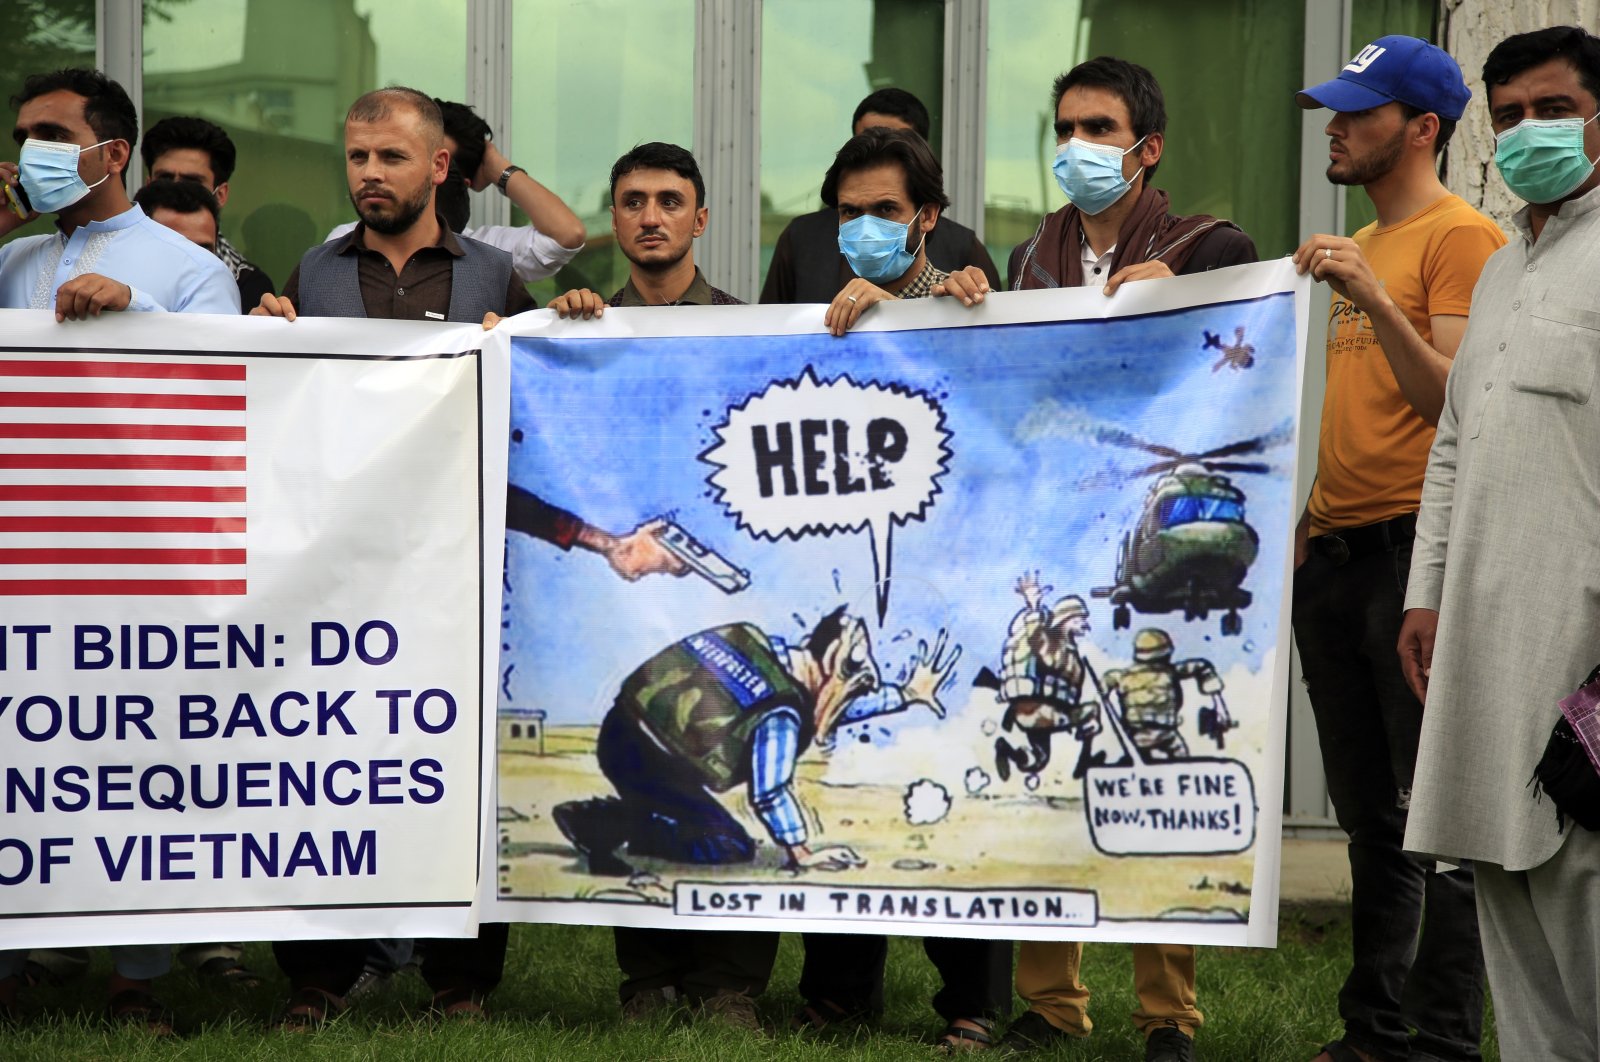 Afghan interpreters hold banners during a protest aimed at the U.S. government and NATO in Kabul, Afghanistan, April 30, 2021. (AP Photo)